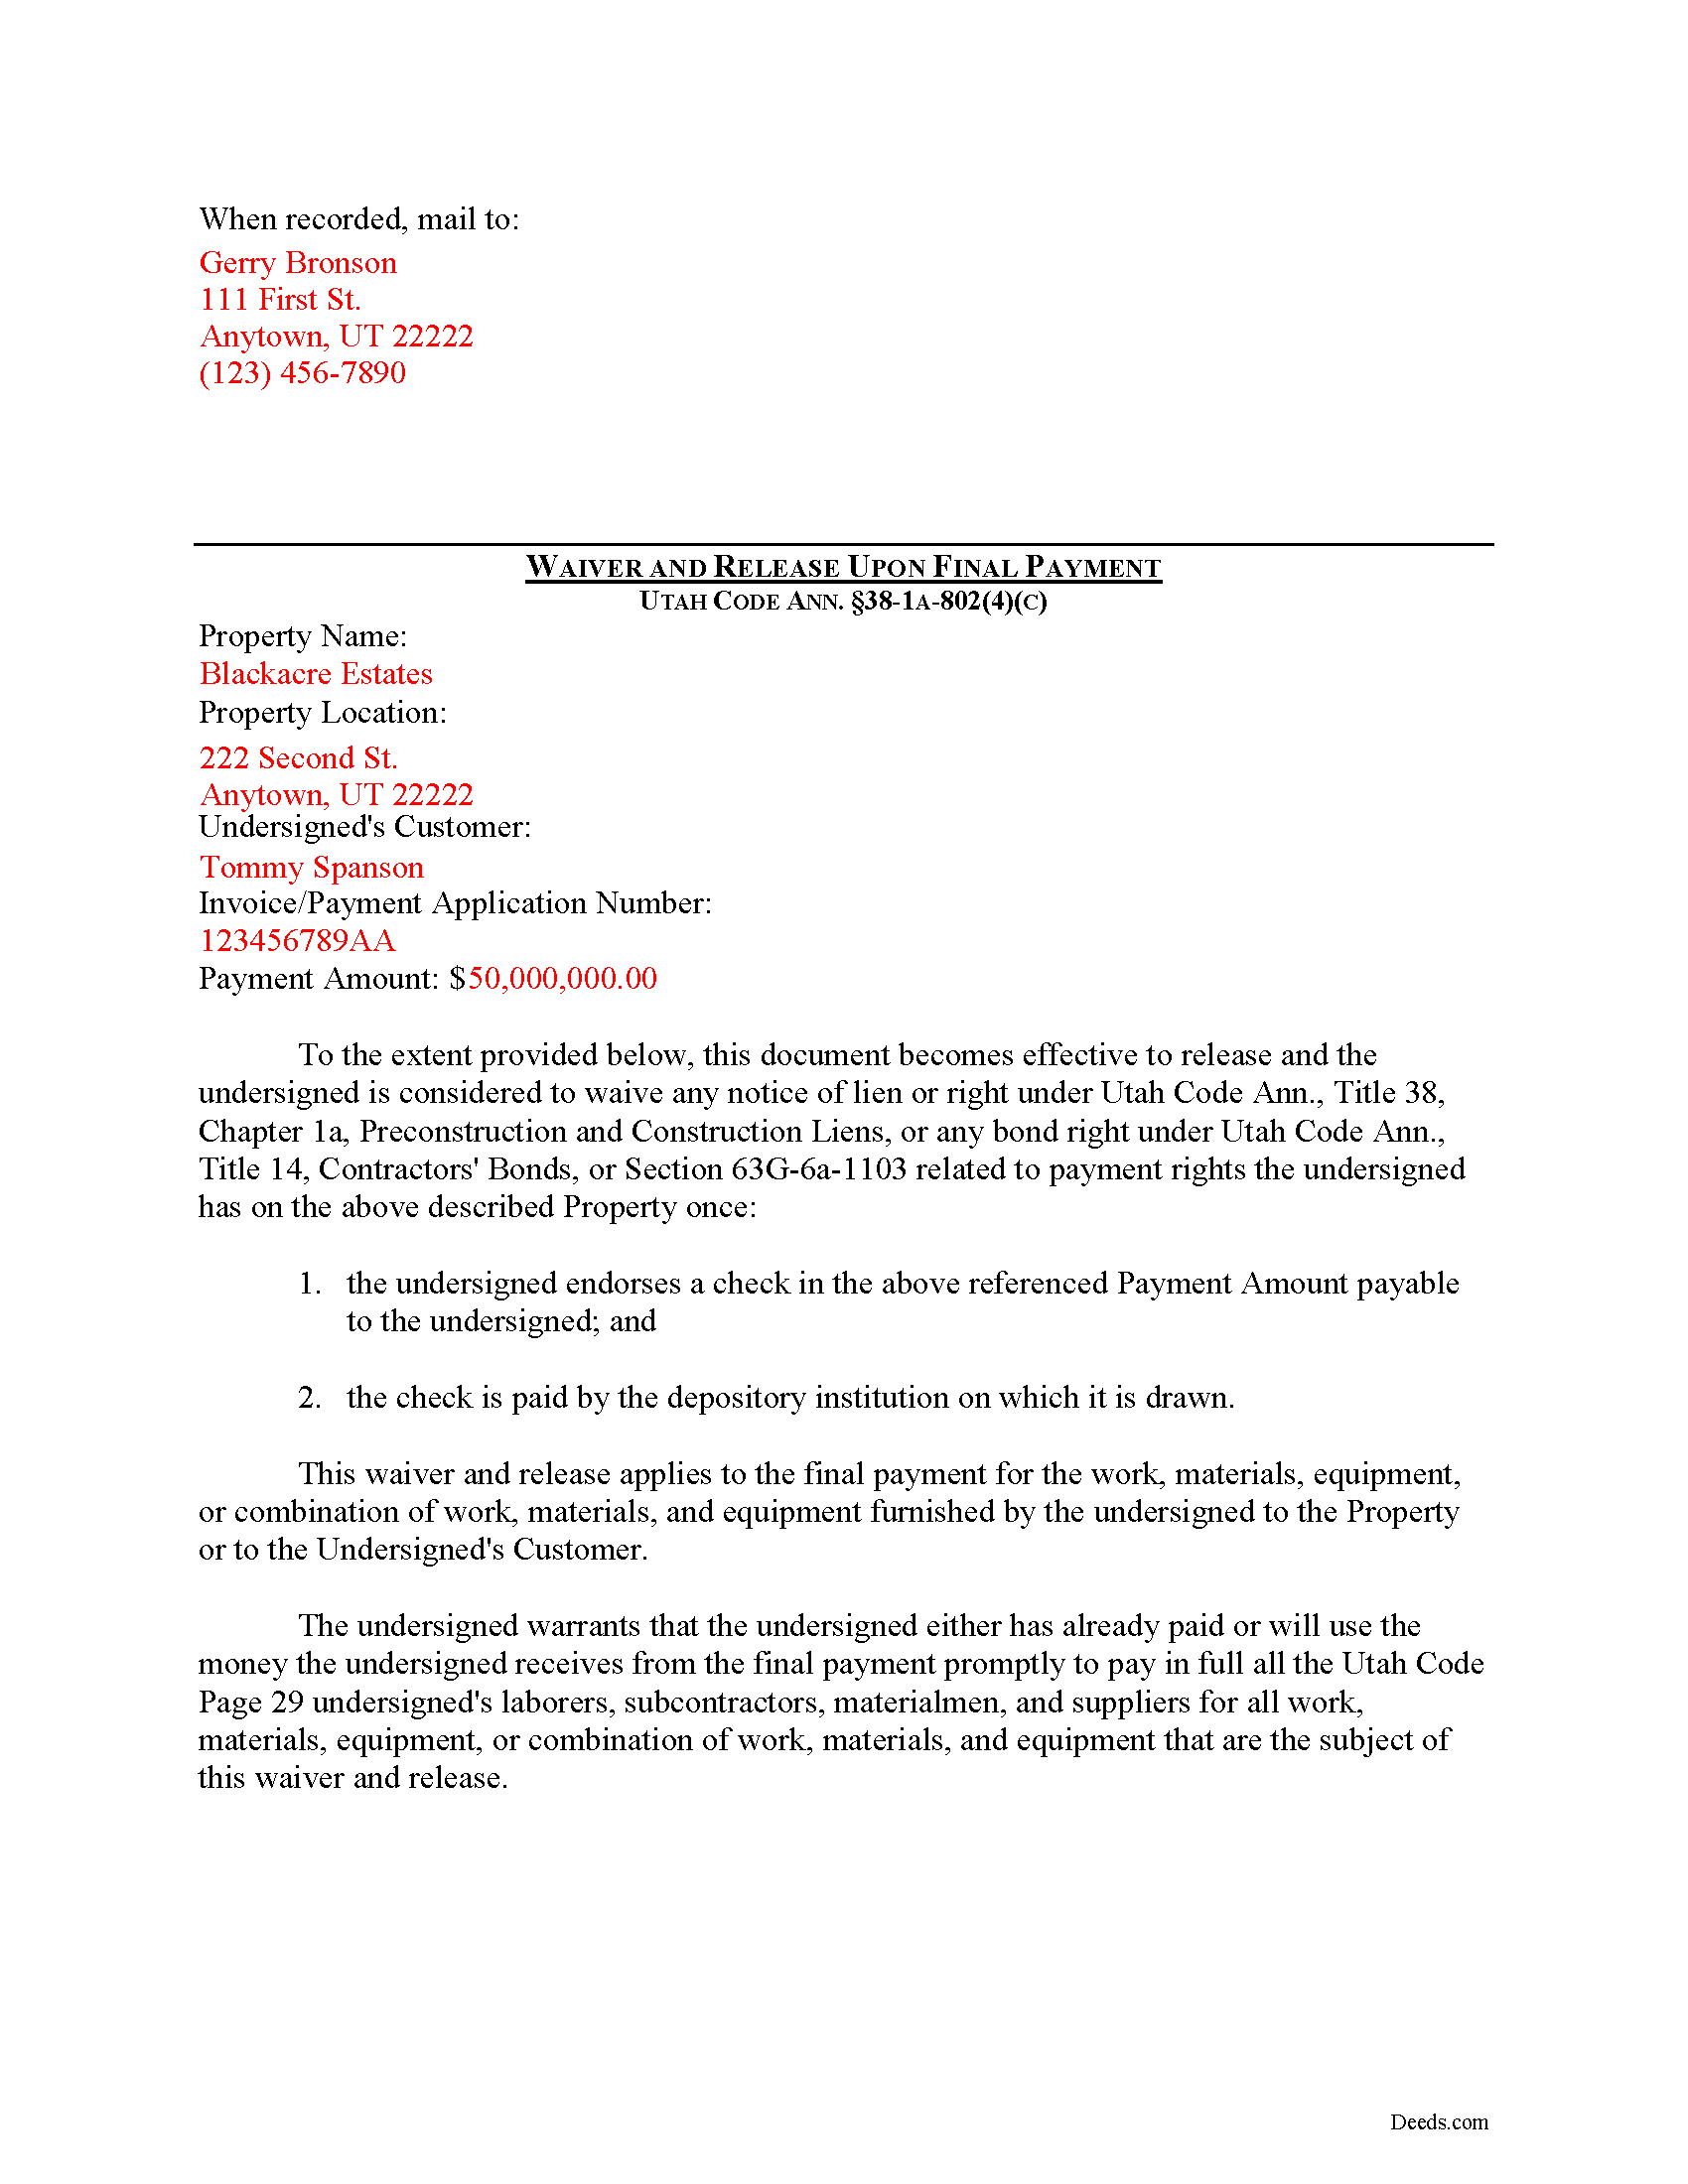 Completed Example of the Waiver and Release on Final Payment Document